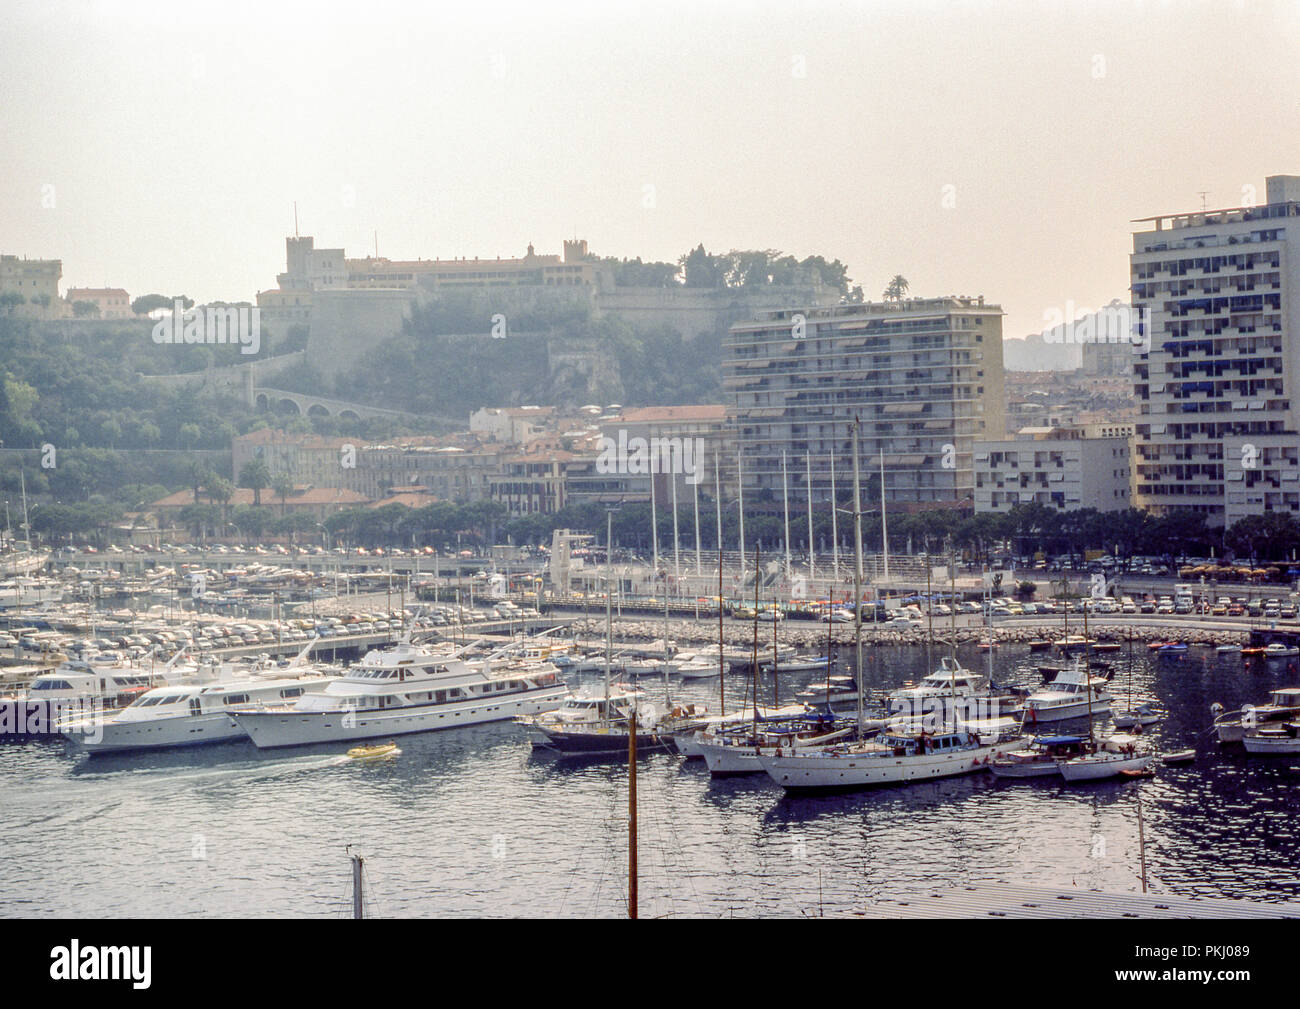 Fontvieille Harbour as seen from a sailing boat in 1976. Original archive image taken in 1976. Stock Photo